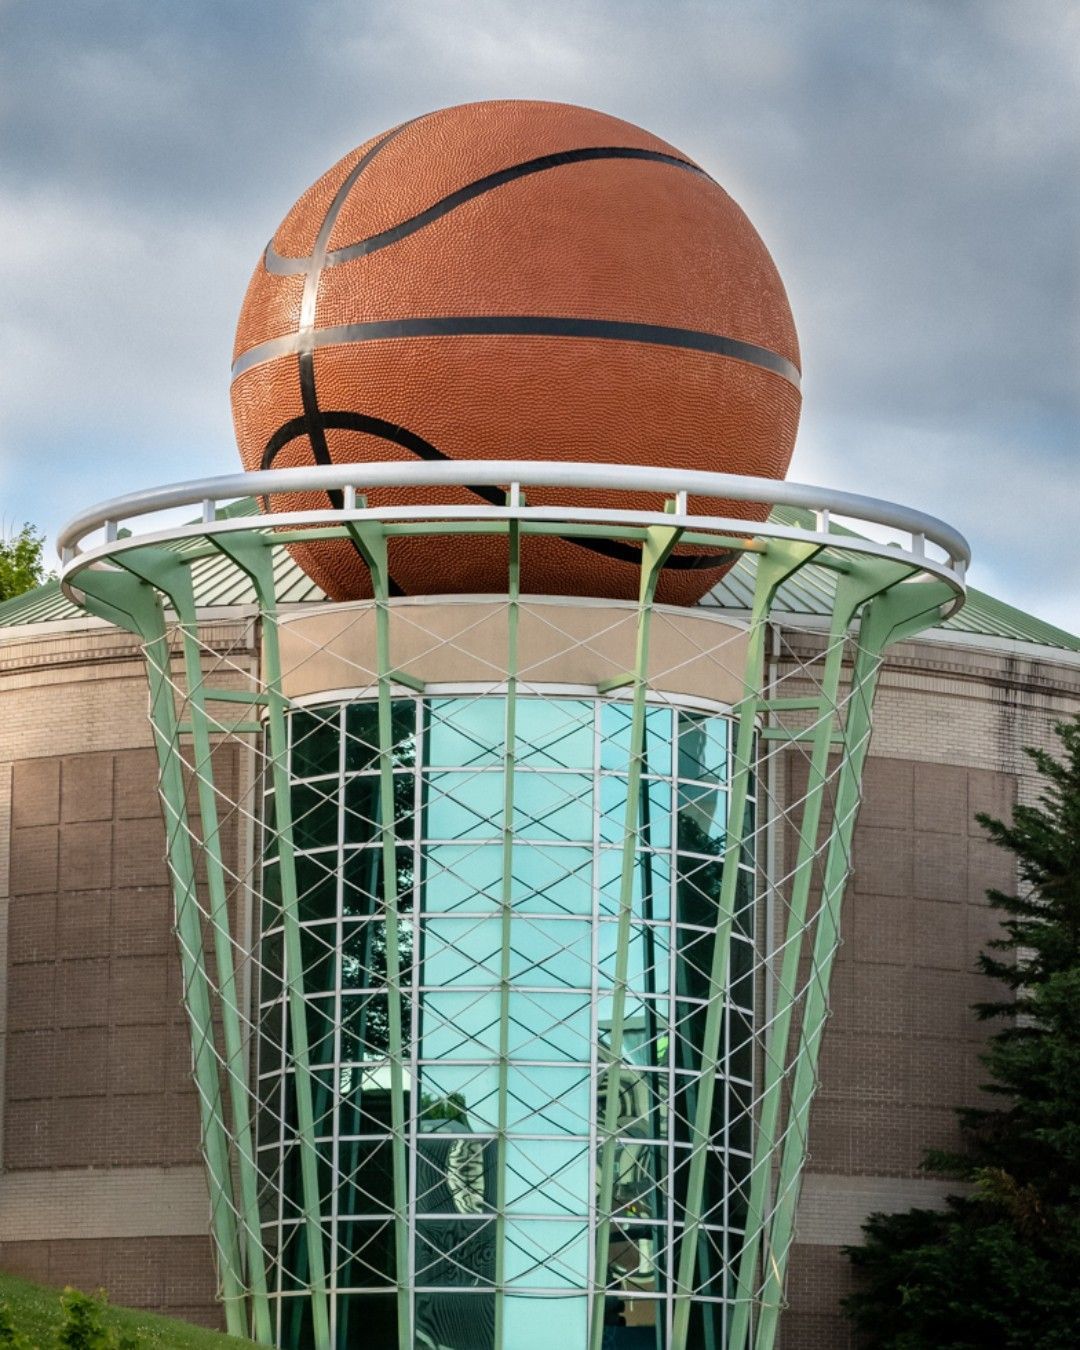 World’s Largest Basketball Sculpture: world record in Knoxville, Tennessee